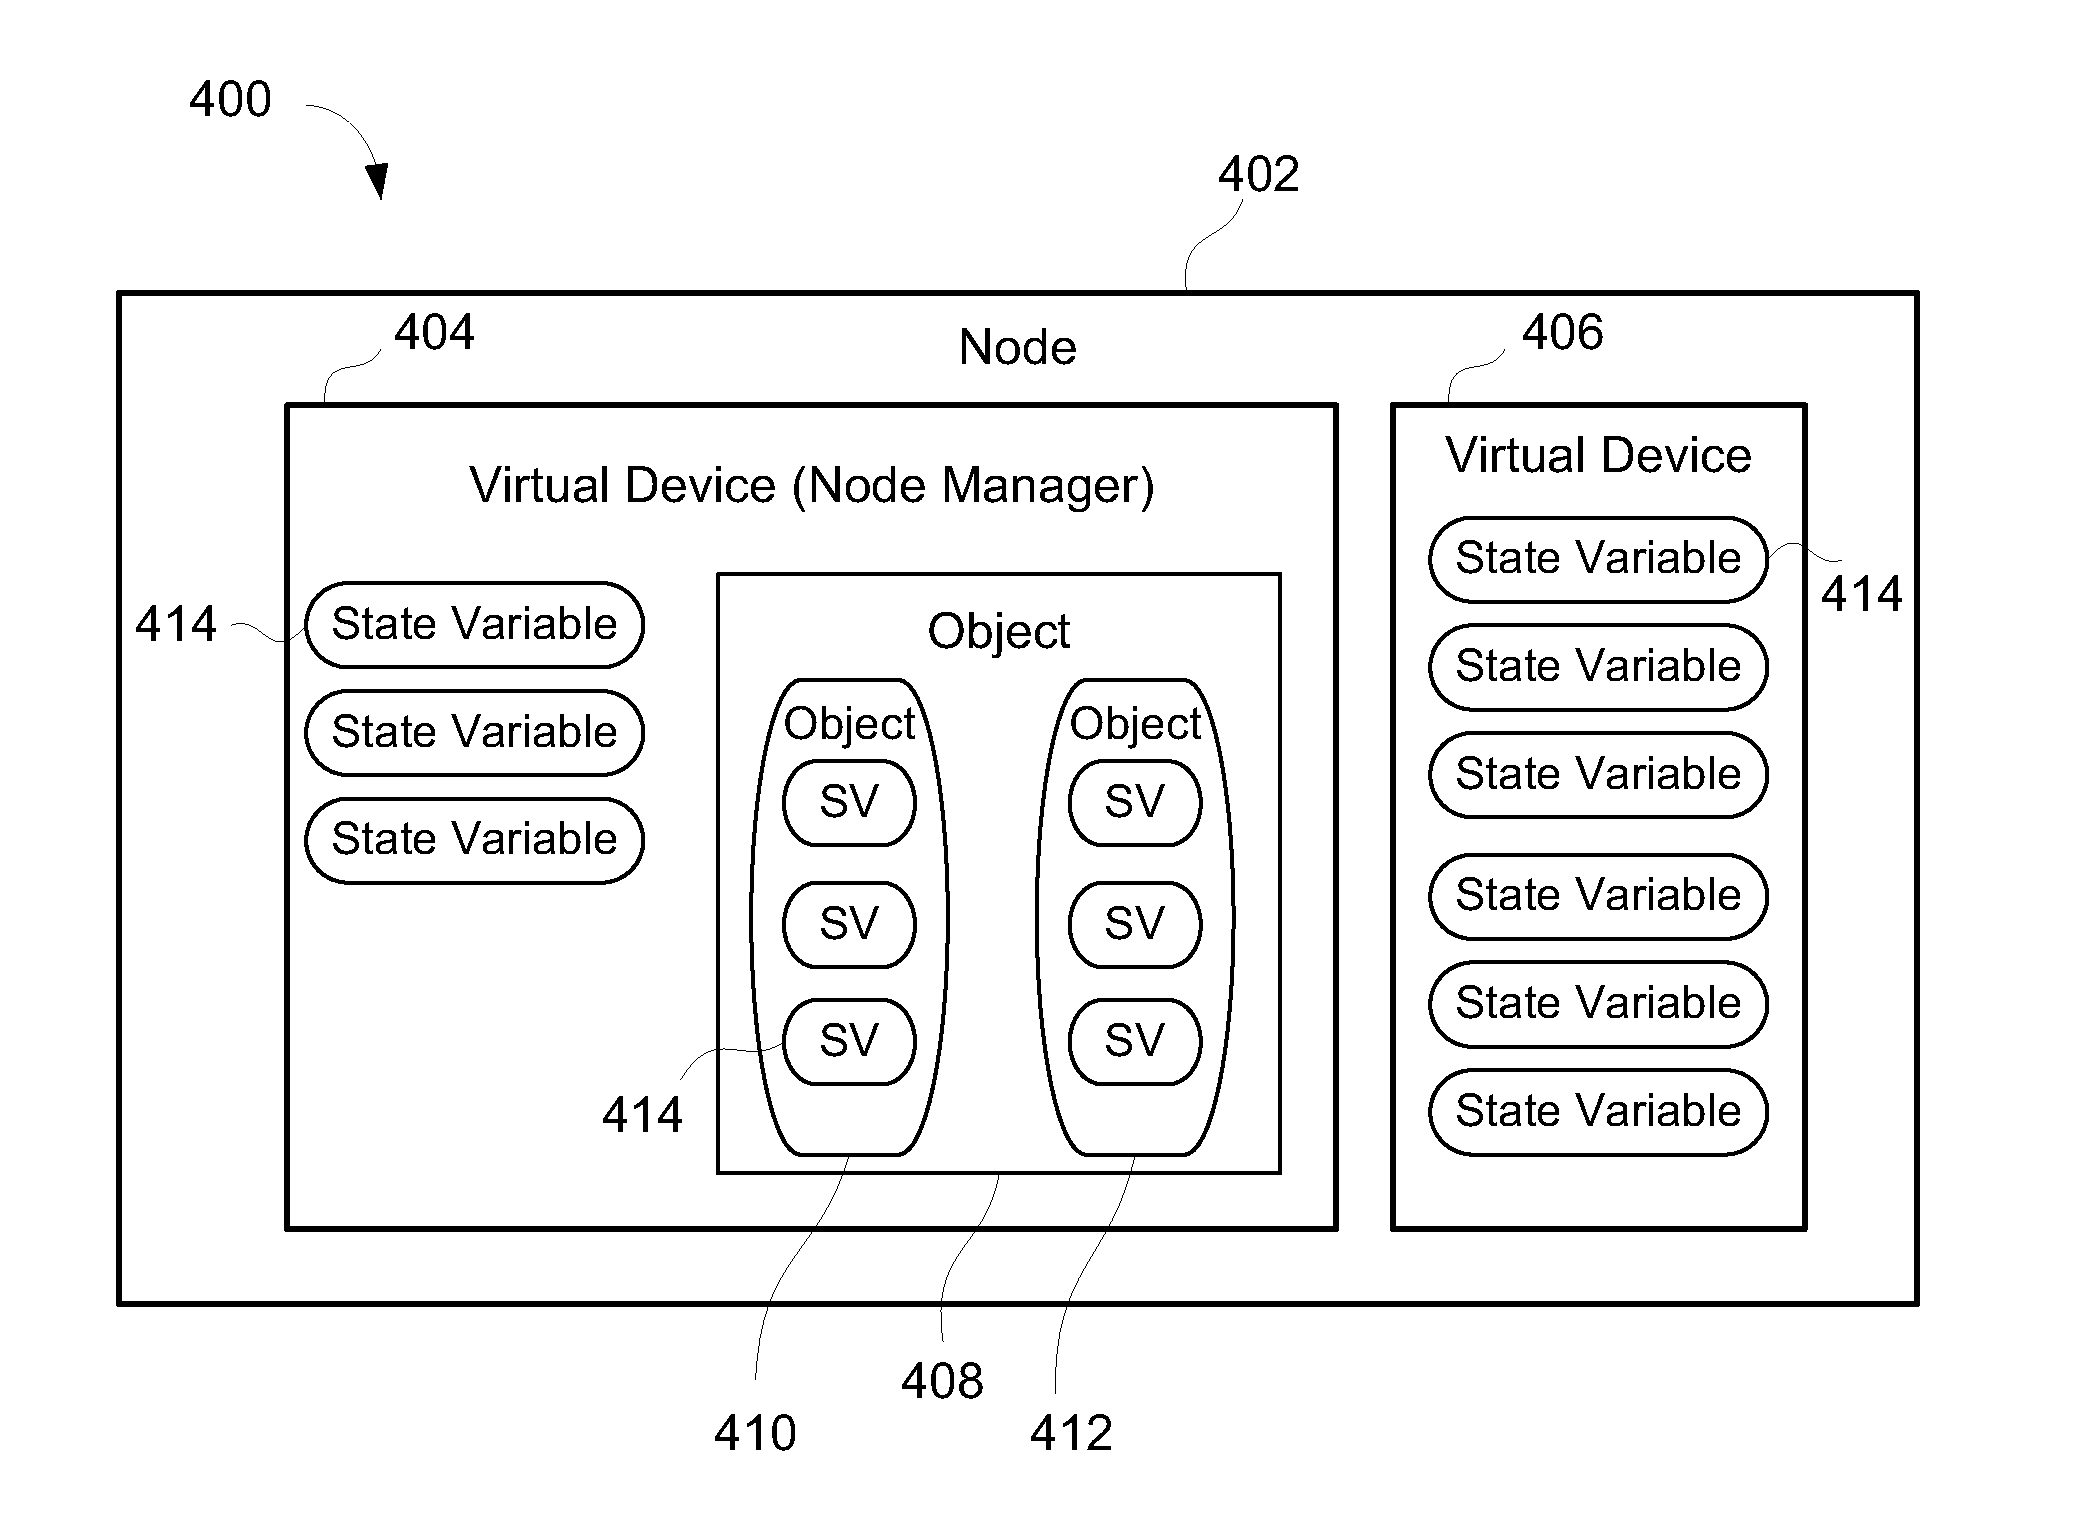 System for configuration and management of live sound system